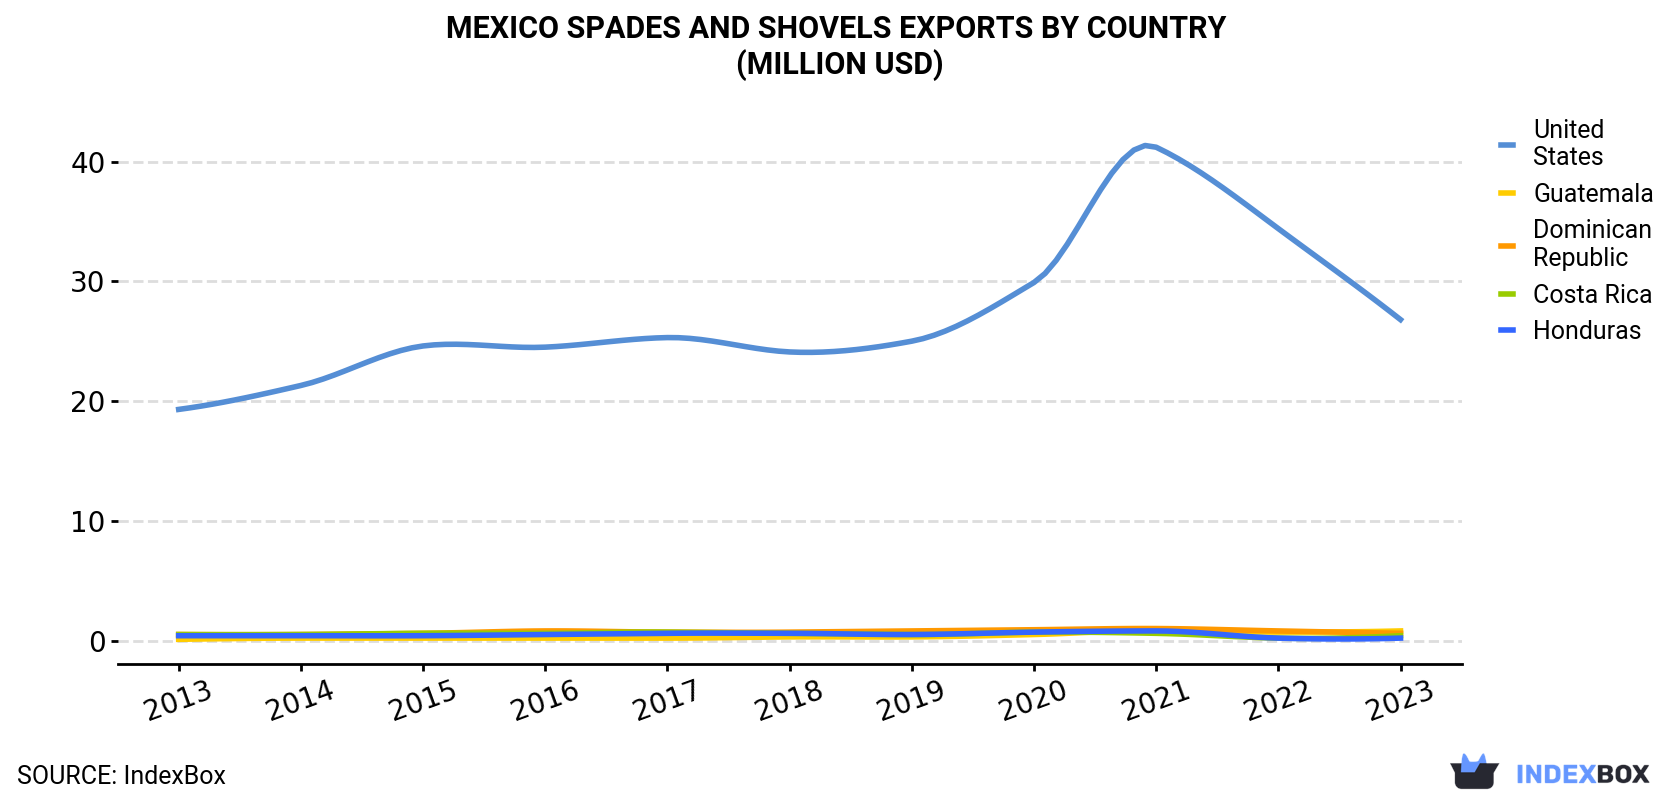 Mexico Spades And Shovels Exports By Country (Million USD)